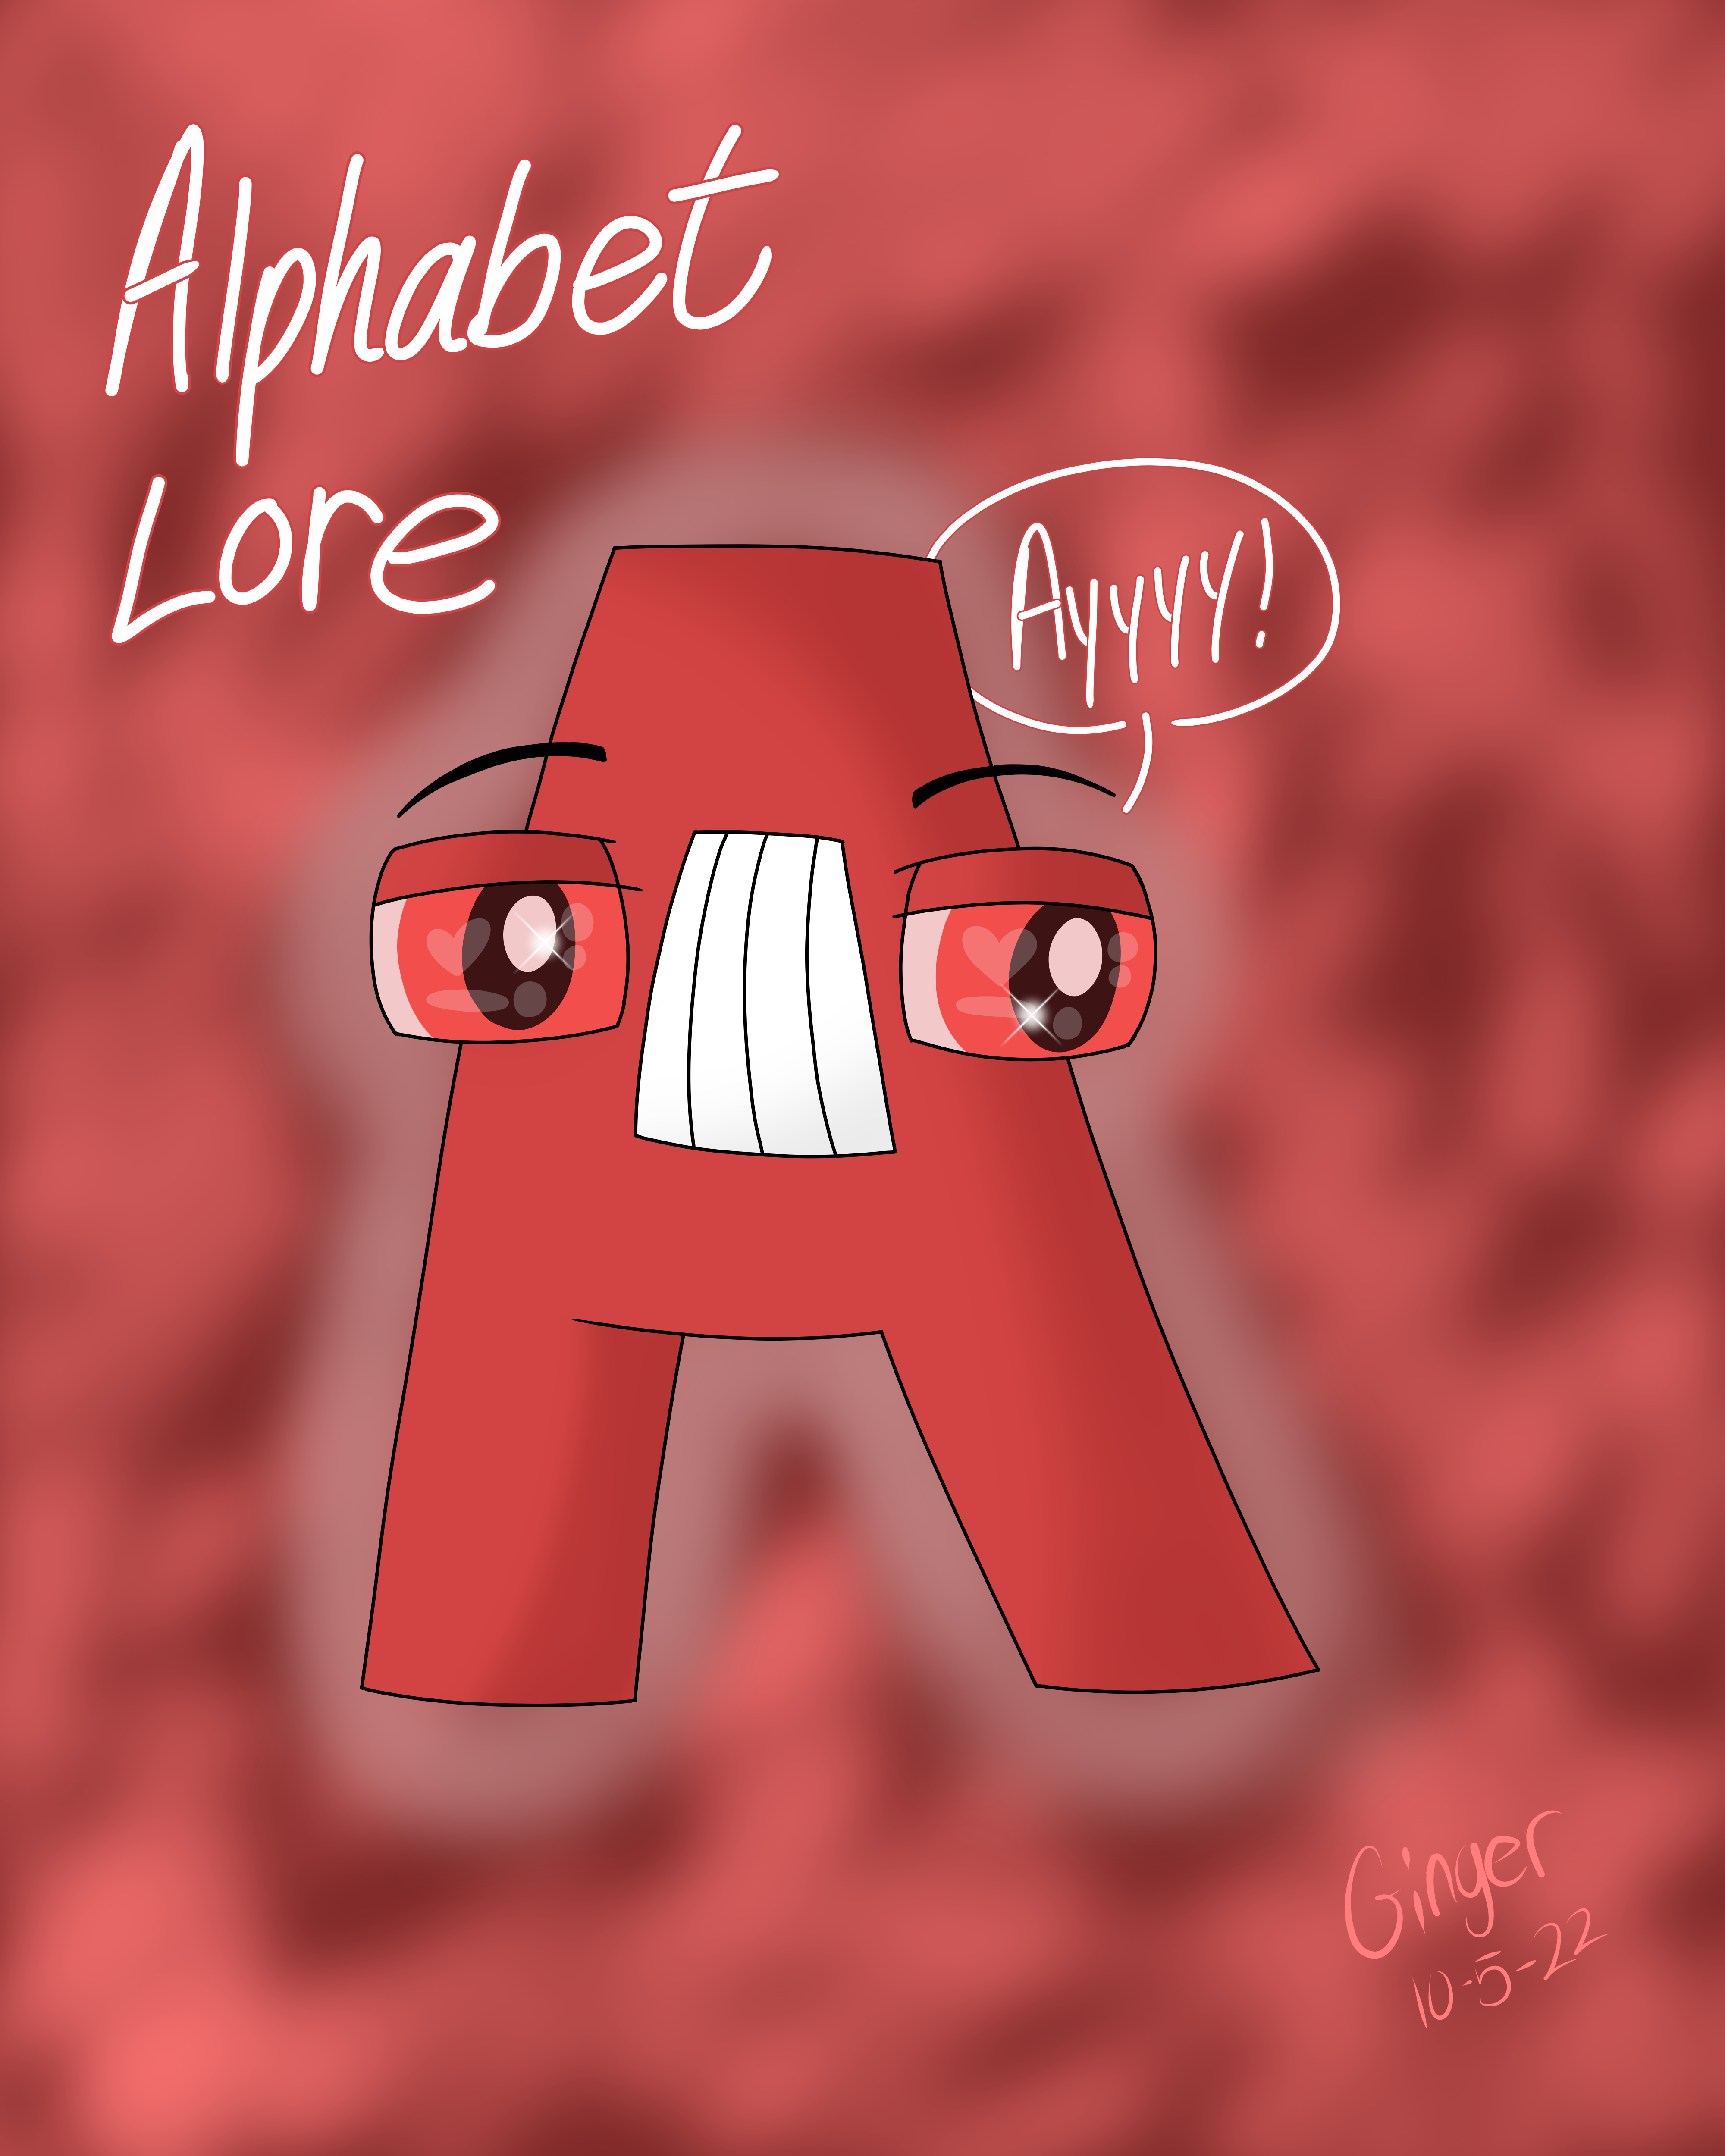 A from Alphabet Lore by TypQxQ